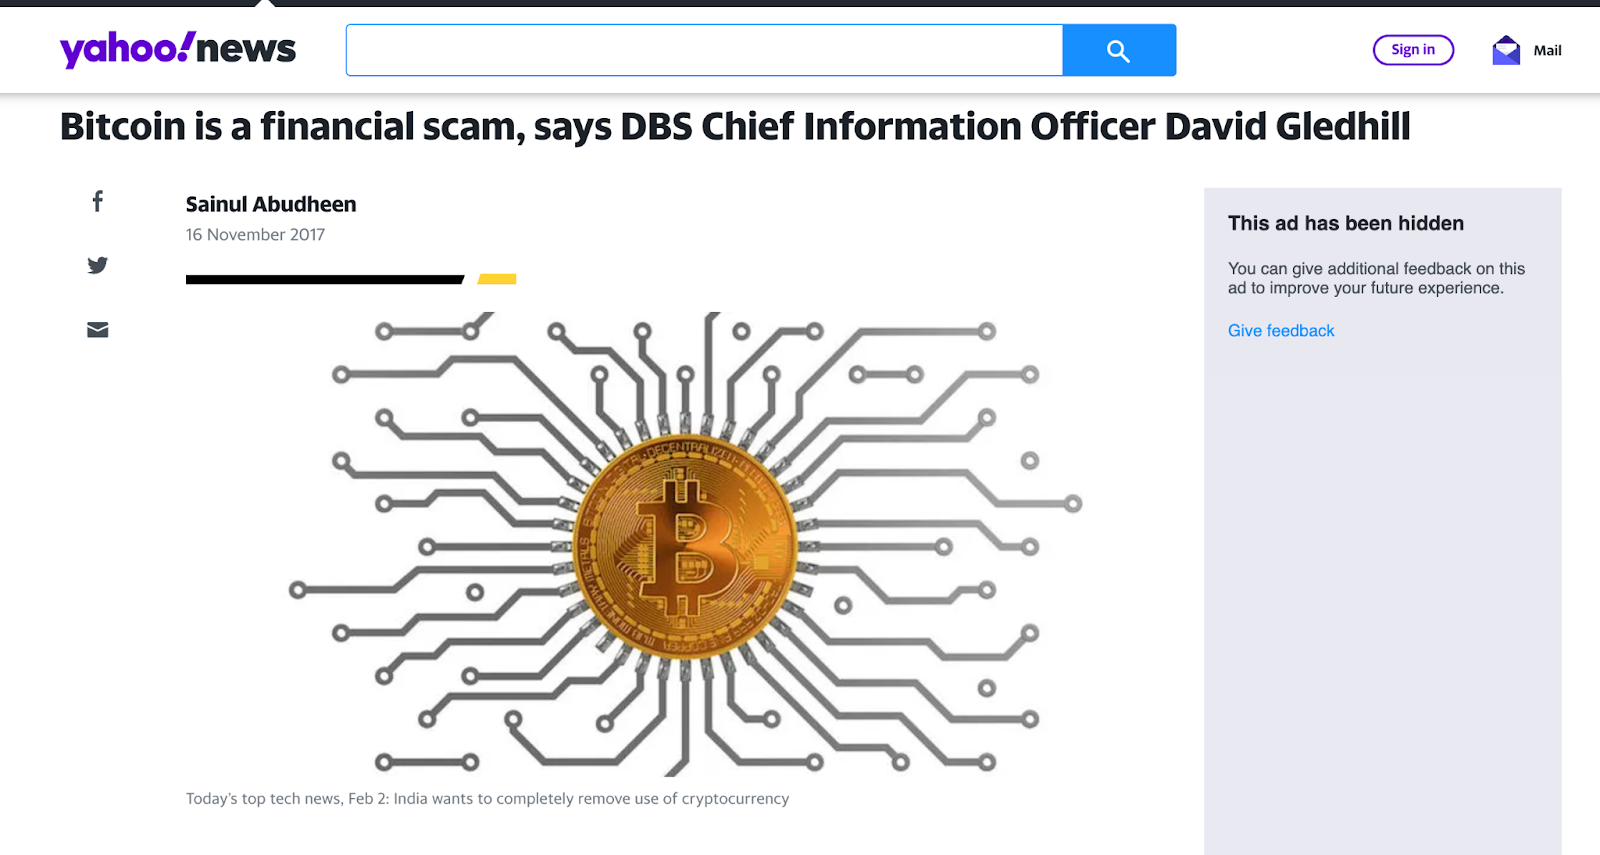 <a href="https://sg.news.yahoo.com/bitcoin-financial-scam-says-dbs-chief-information-officer-065709174.html">Bitcoin is a financial scam, says DBS Chief Information Officer David Gledhill</a>